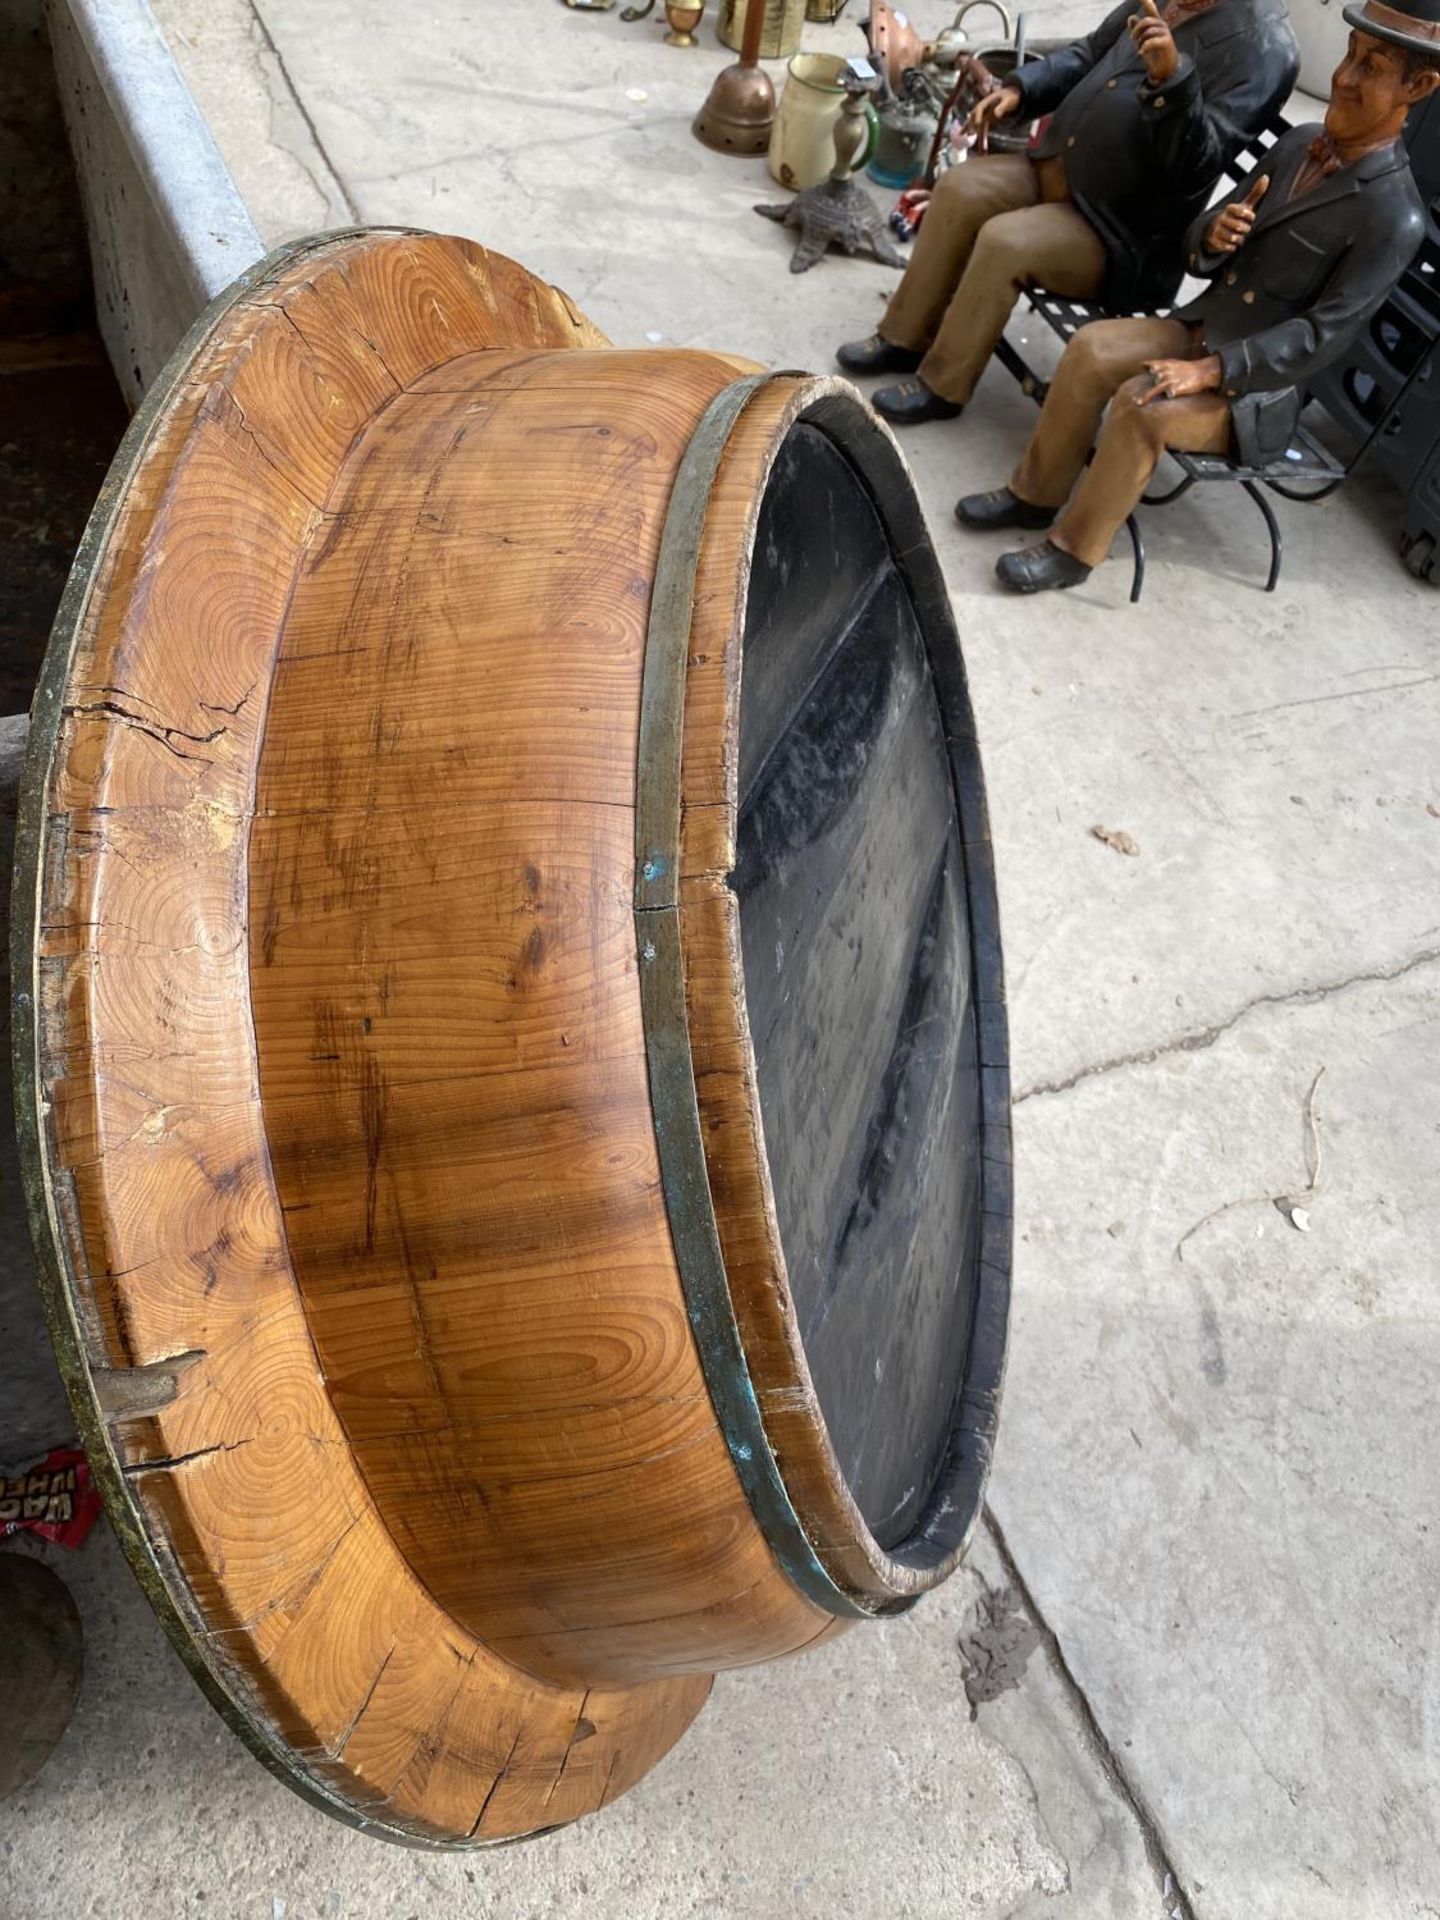 A LARGE WOODEN BOWL WITH METAL BANDING - Image 5 of 5